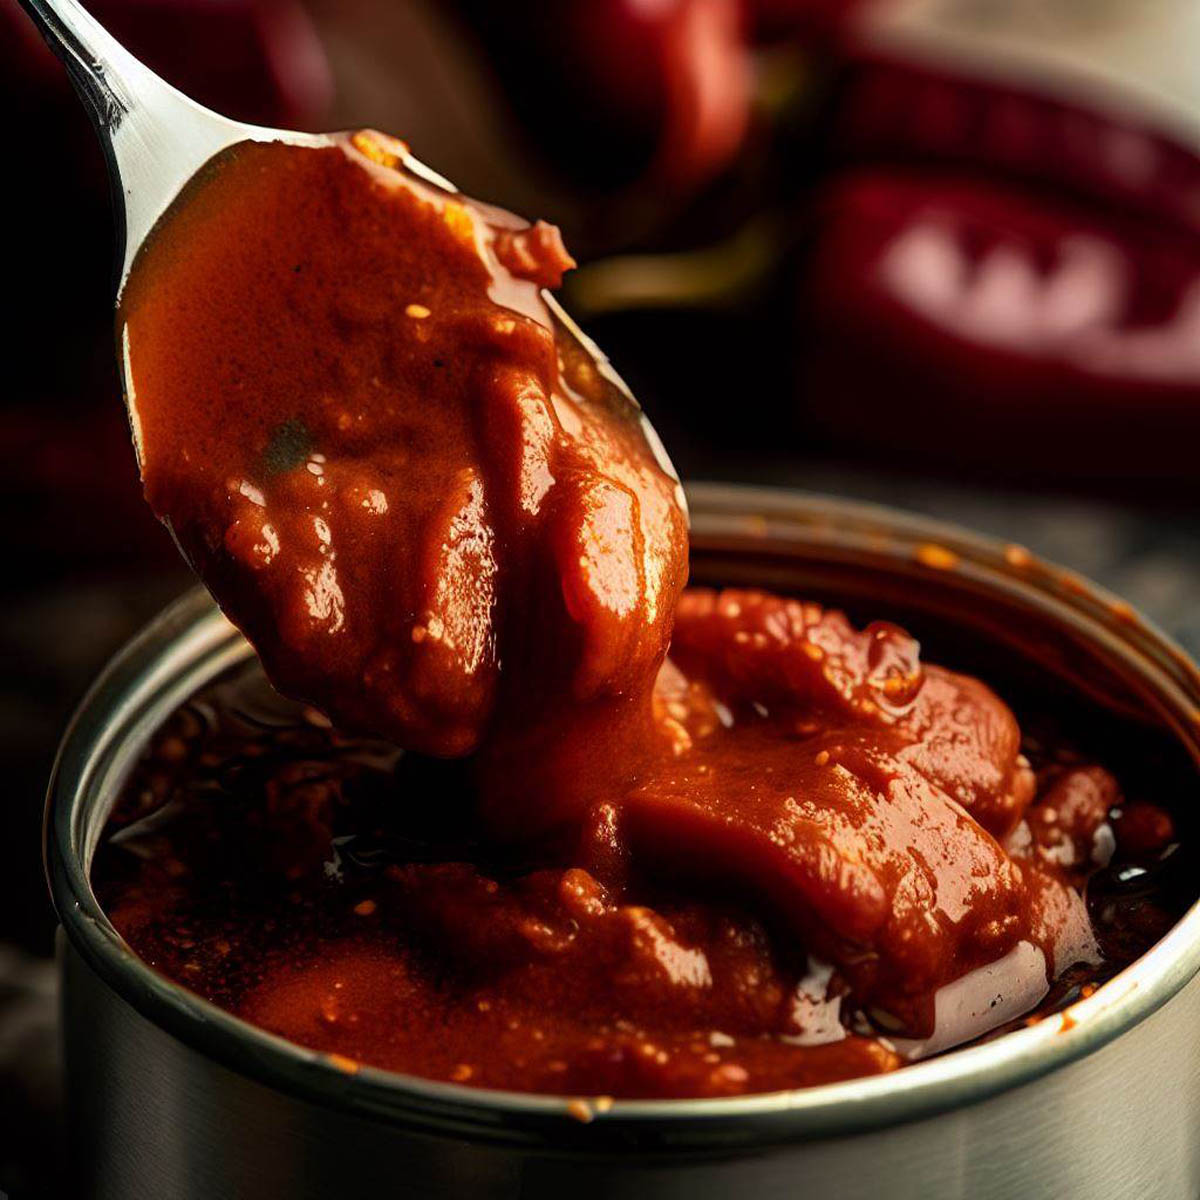 Chipotle peppers in adobo sauce as a key ingredient for the recipe